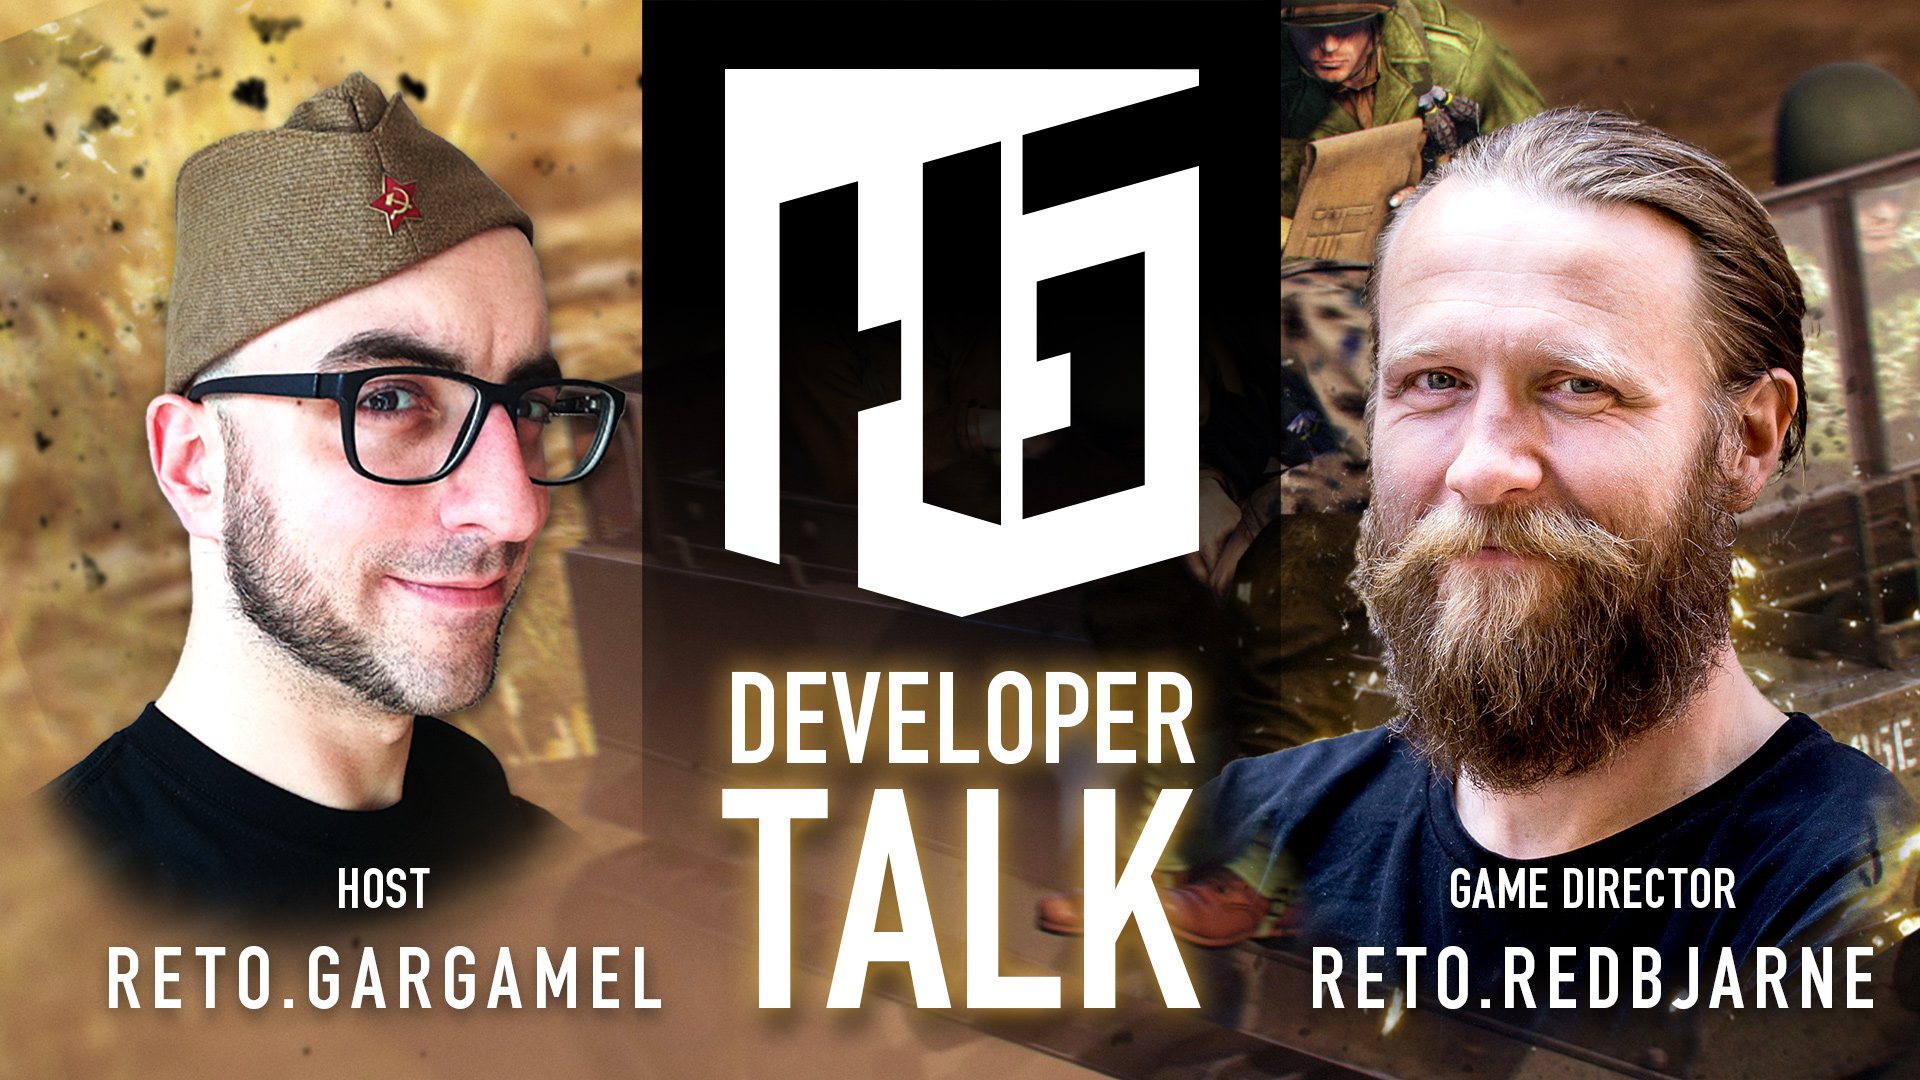 Heroes & Generals on Twitter: "Developer Talk #3 Join us tomorrow, Friday  the 28th of June on Twitch at 15:00 CEST / 9am EST! Reto.Gargamel, Reto.RedBjarne  and other Retos will talk about